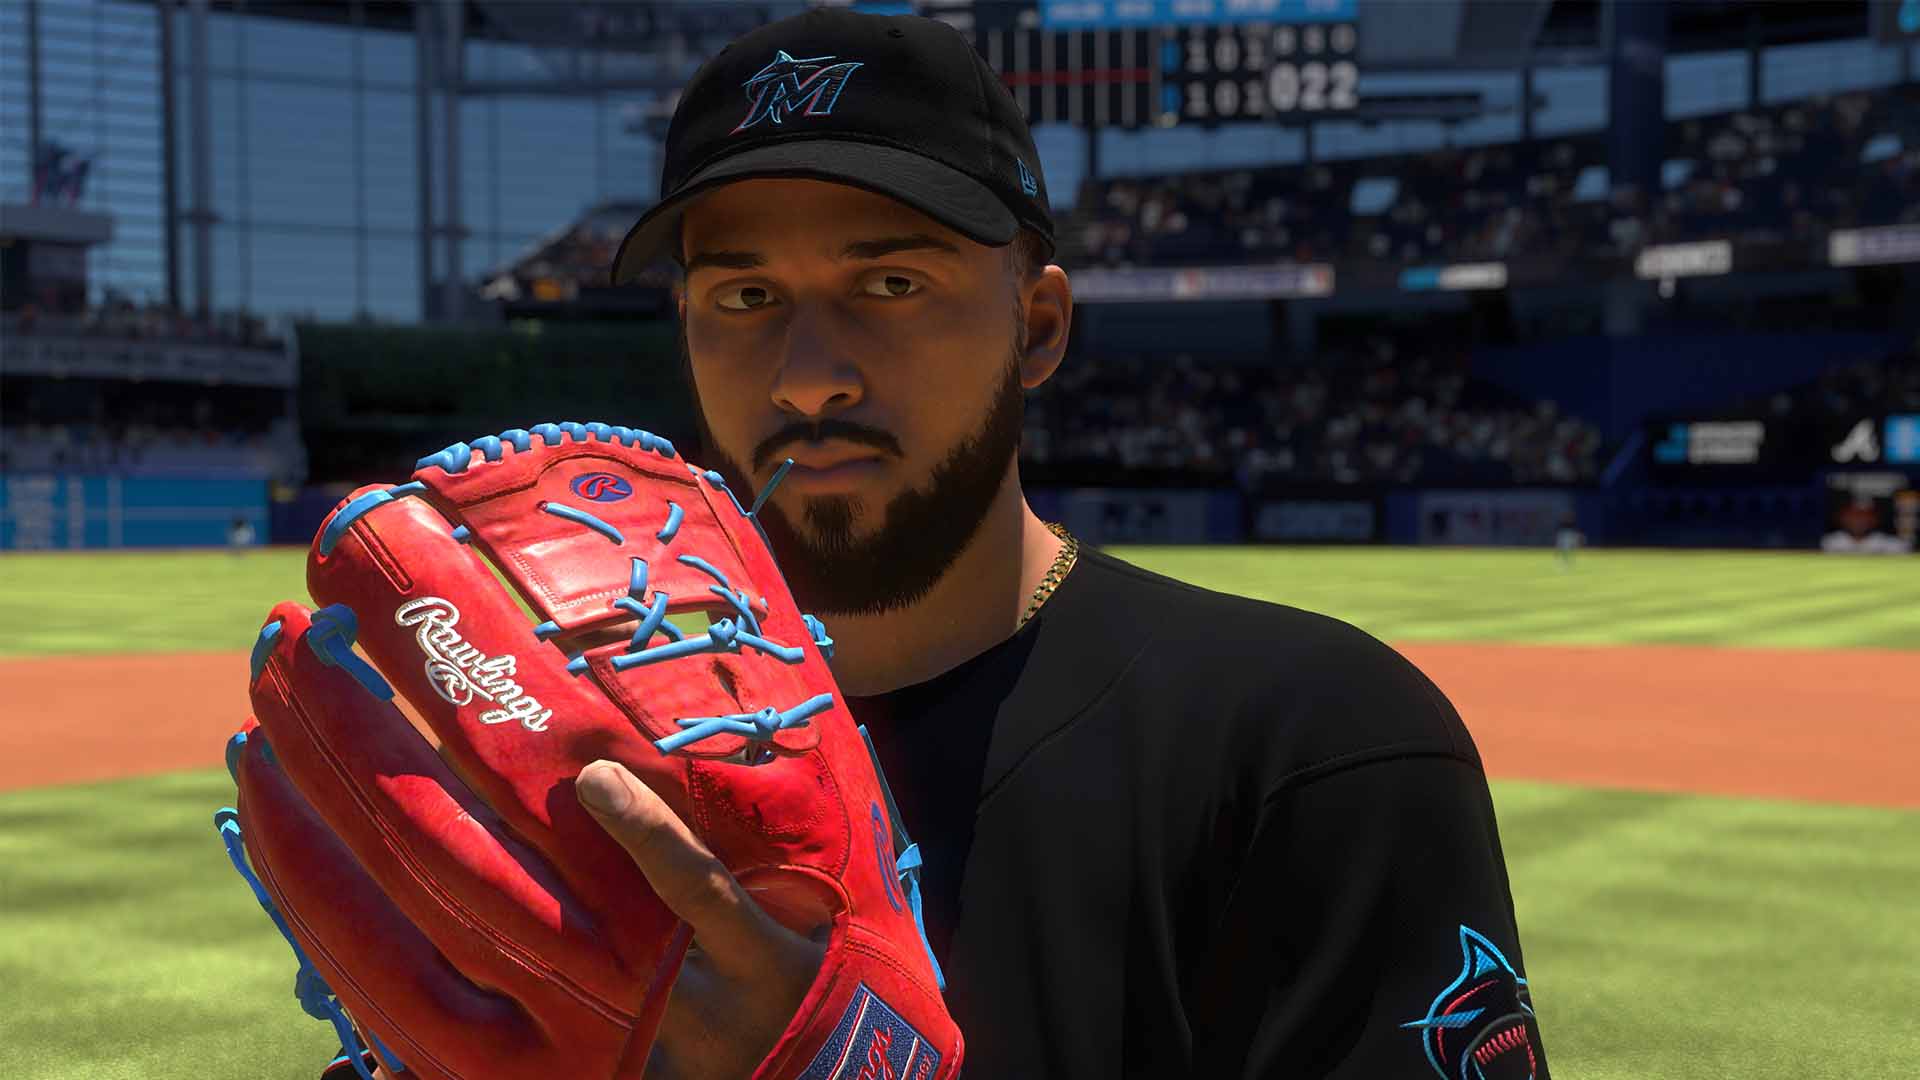 MLB The Show 23 to feature Negro Leagues stars